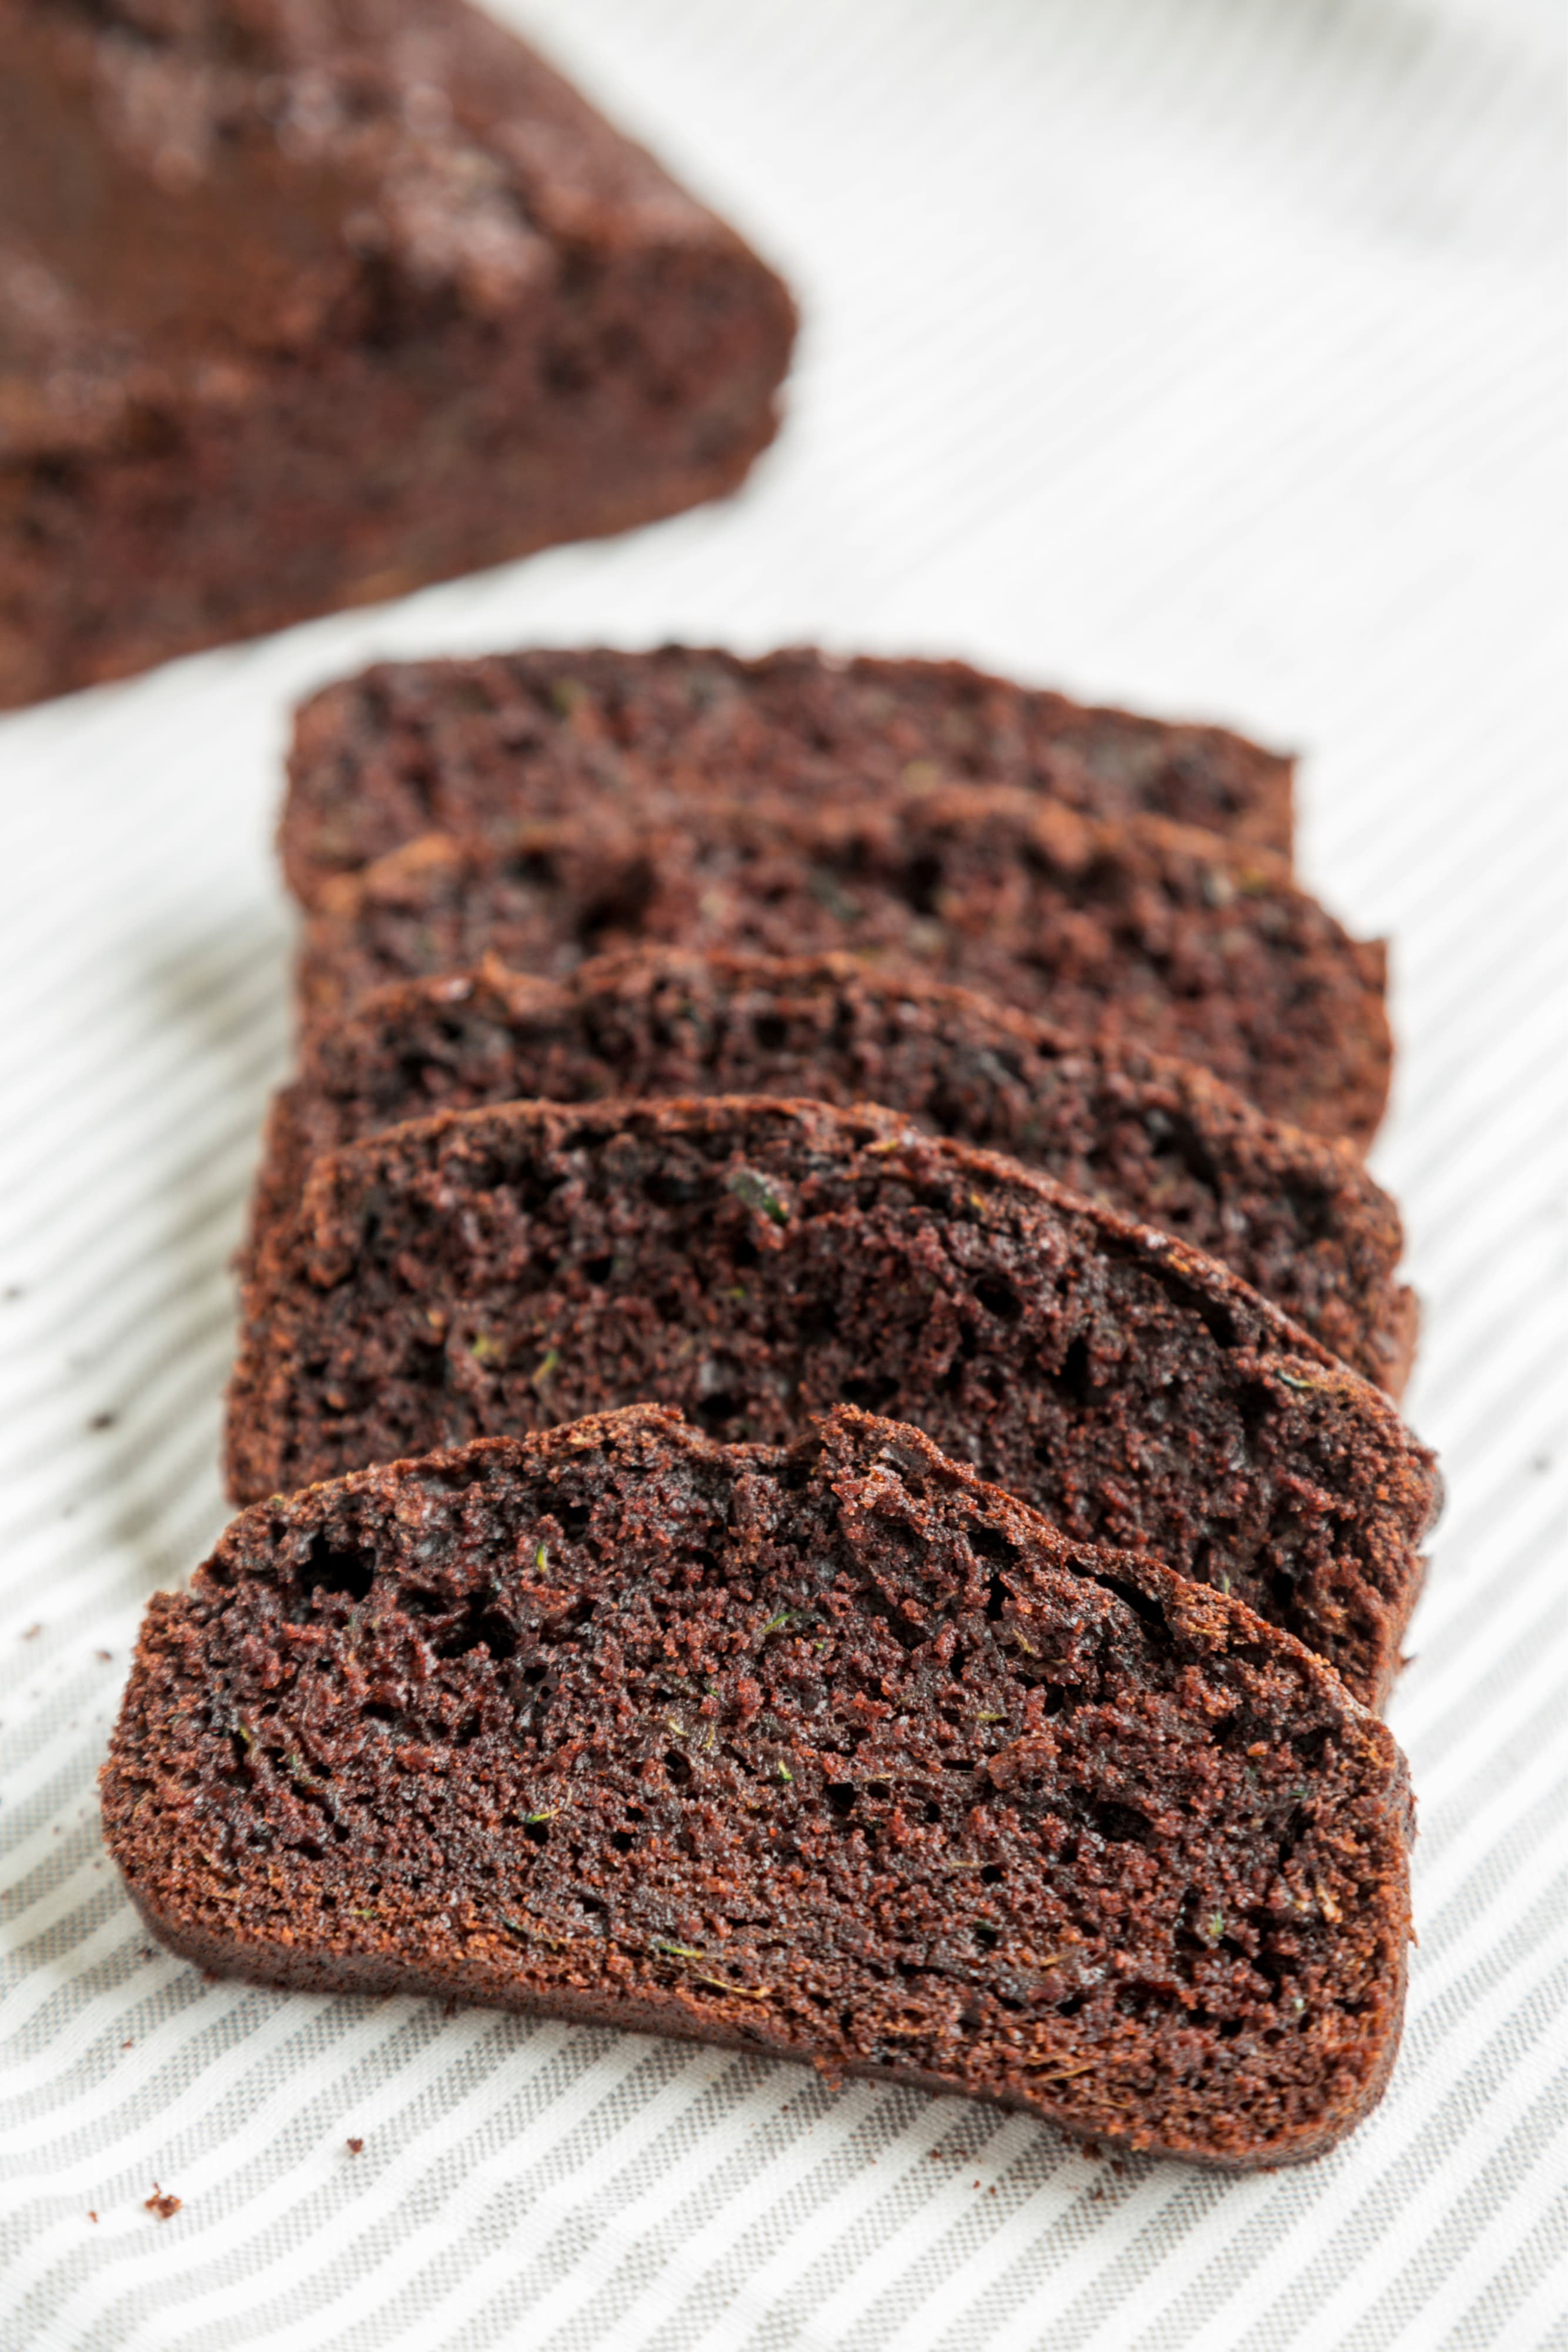 Homemade chocolate zucchini bread on a rustic wooden board, side view